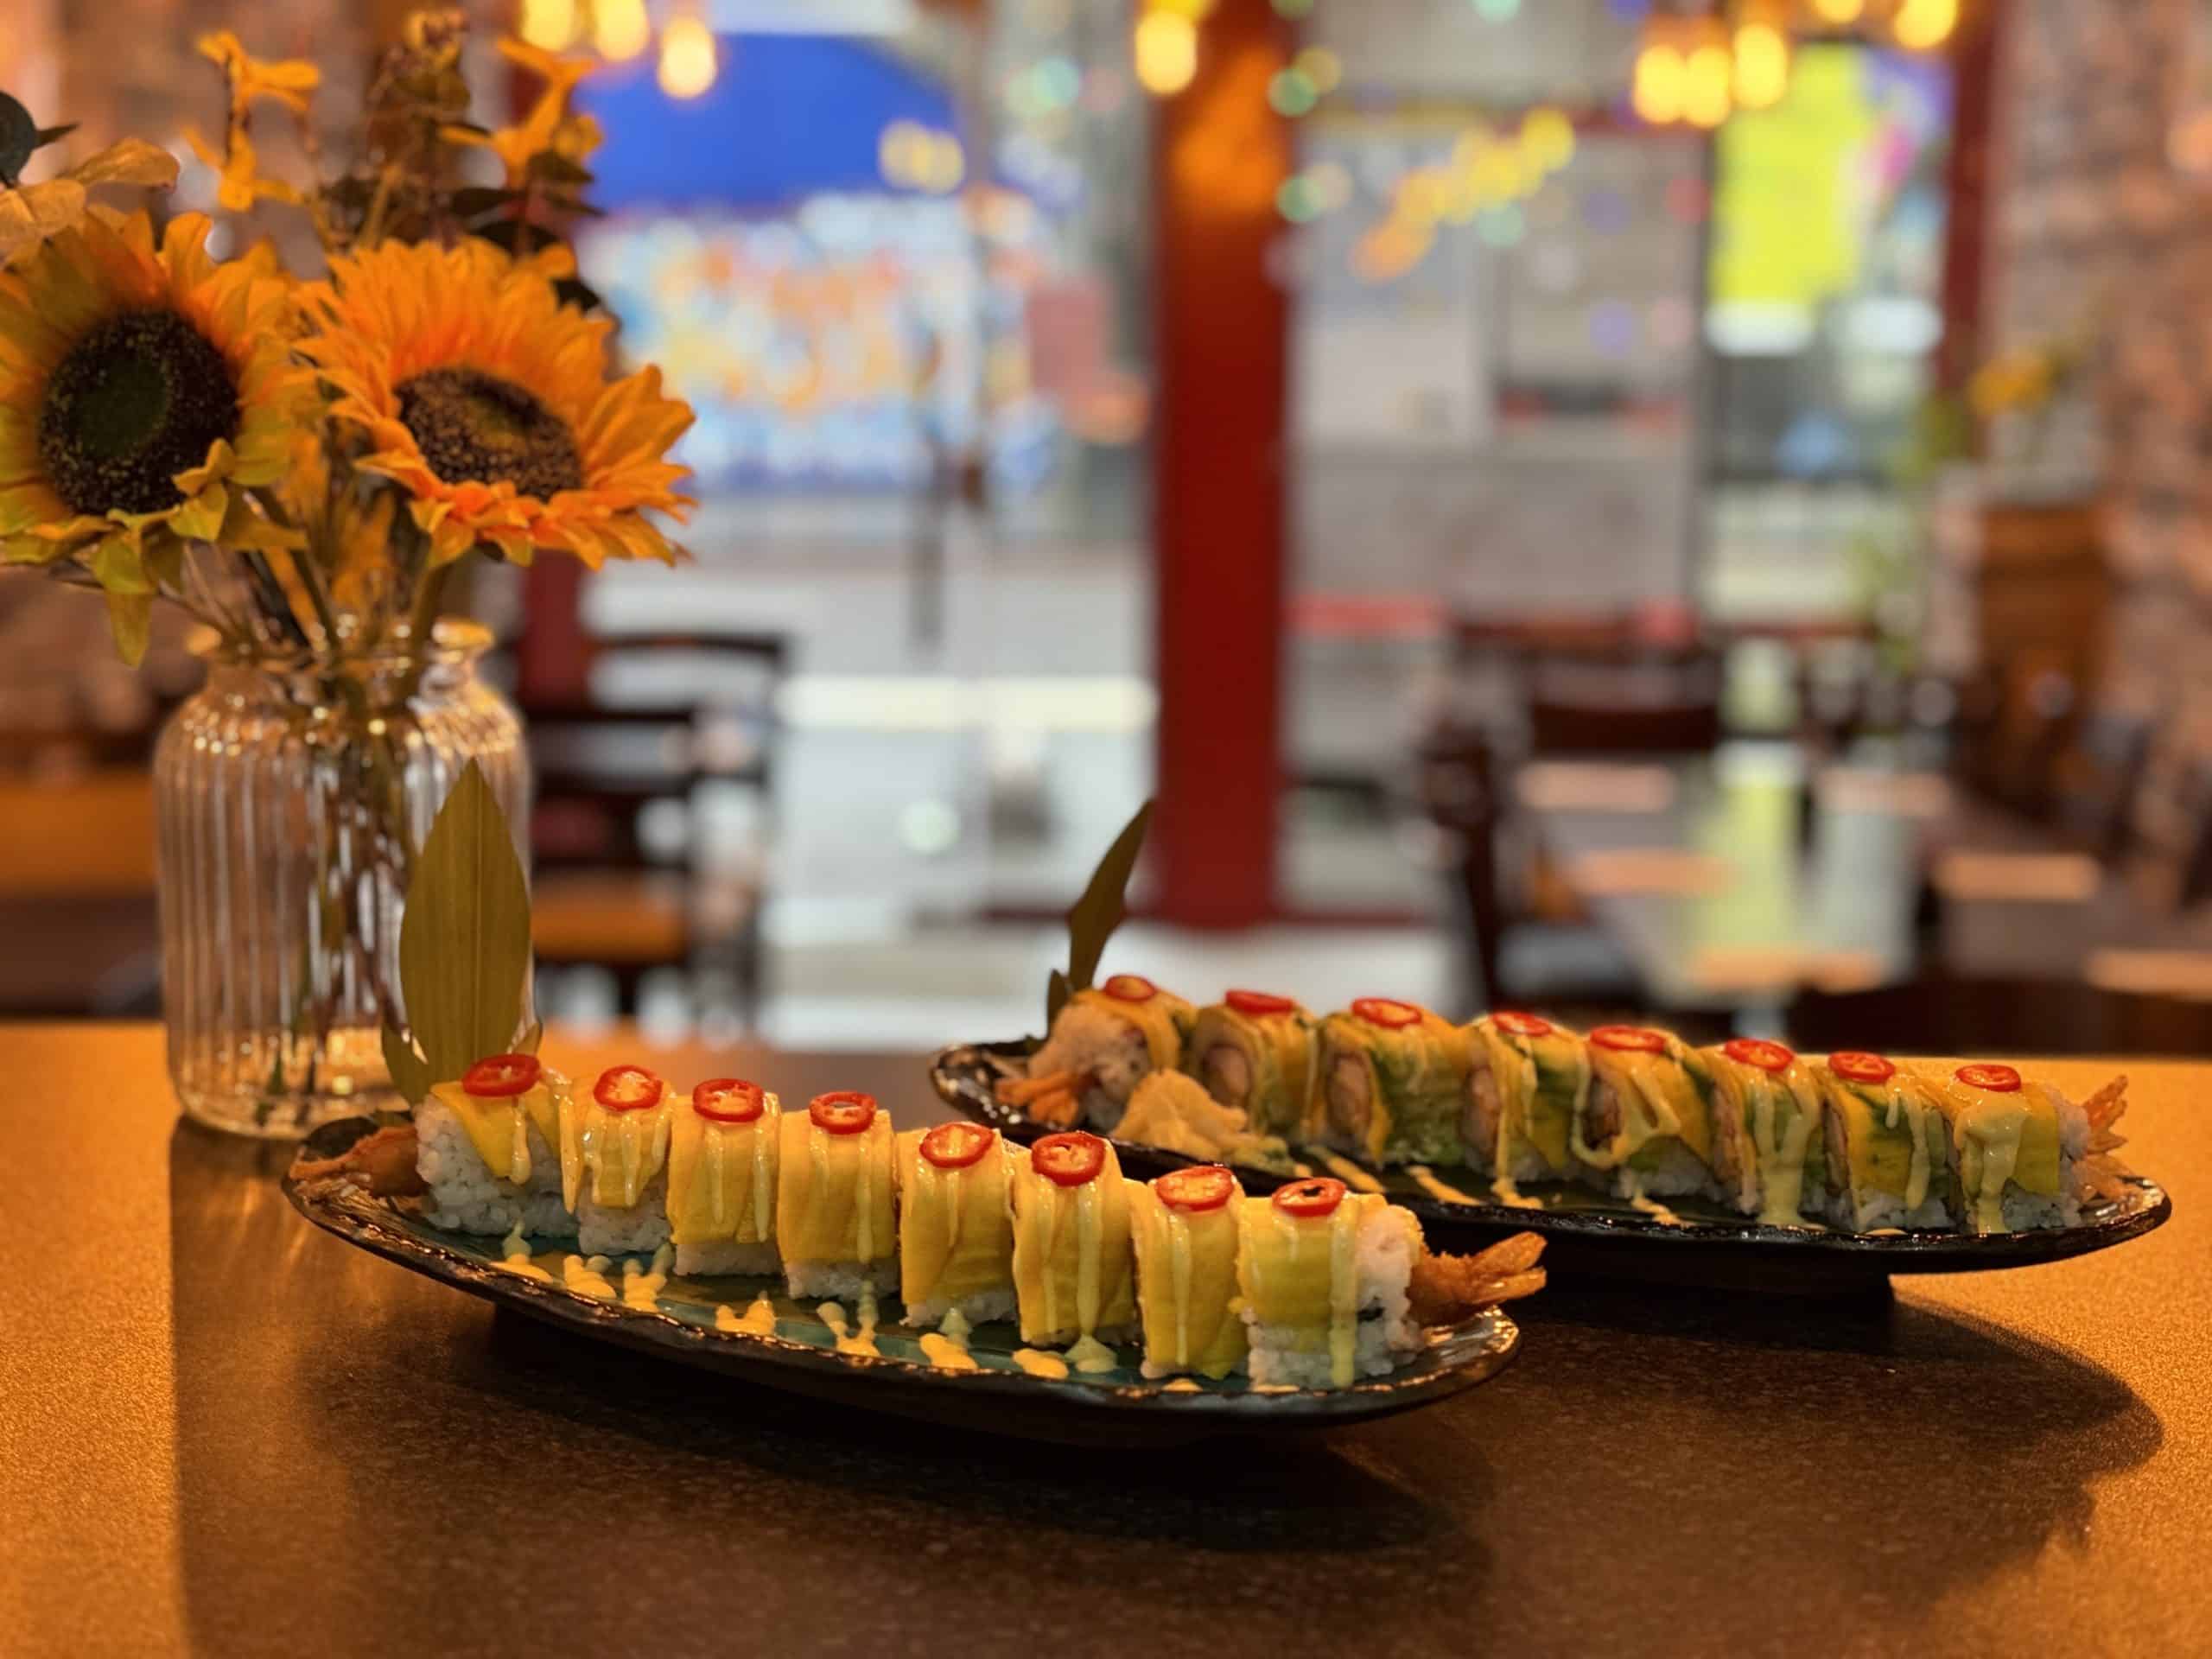 A table with two plates of sushi and flowers, creating a delightful and appetizing arrangement.